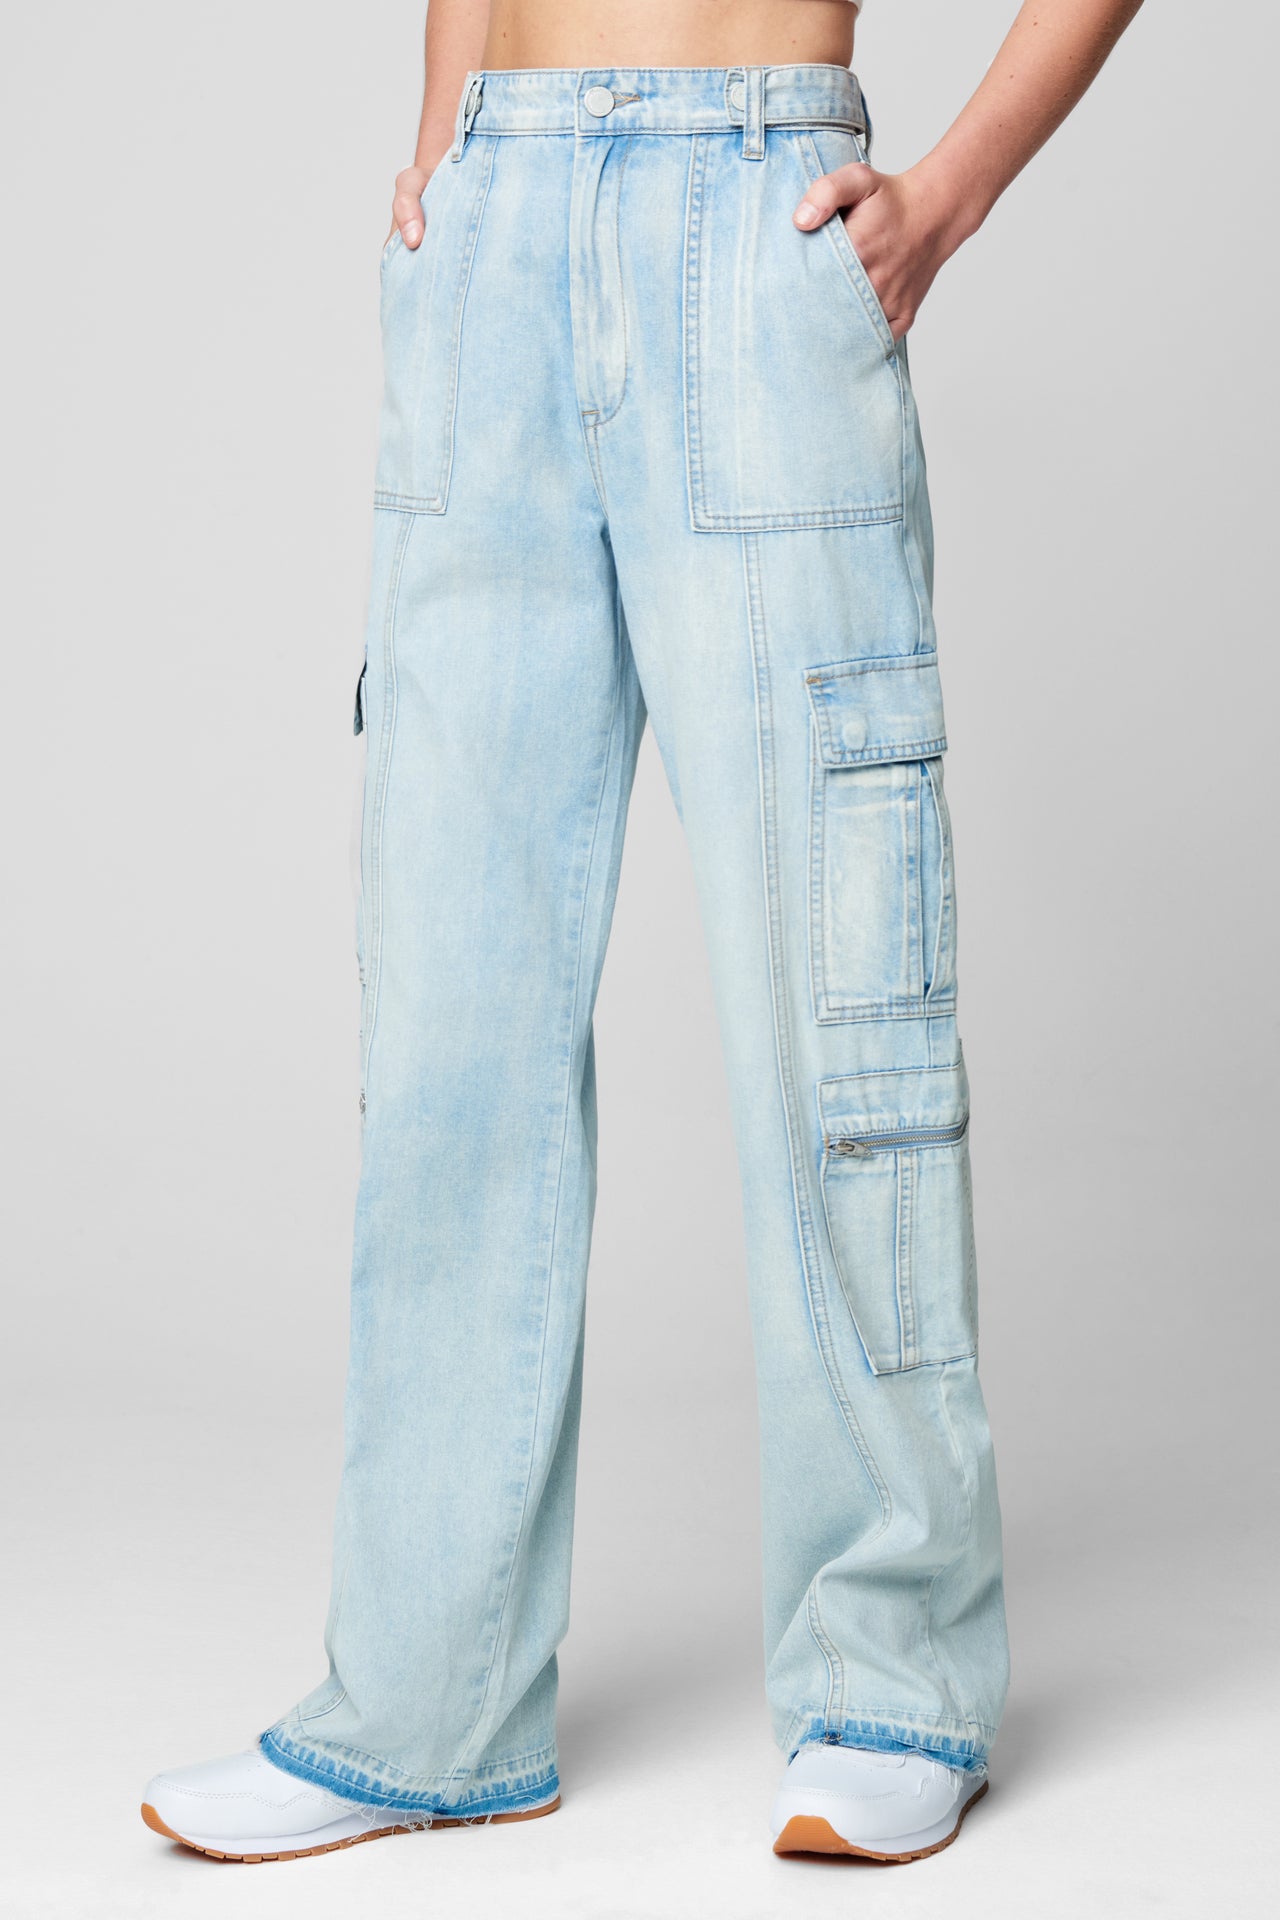 Call My Name Cargo Pants LIT Boutique Blue 